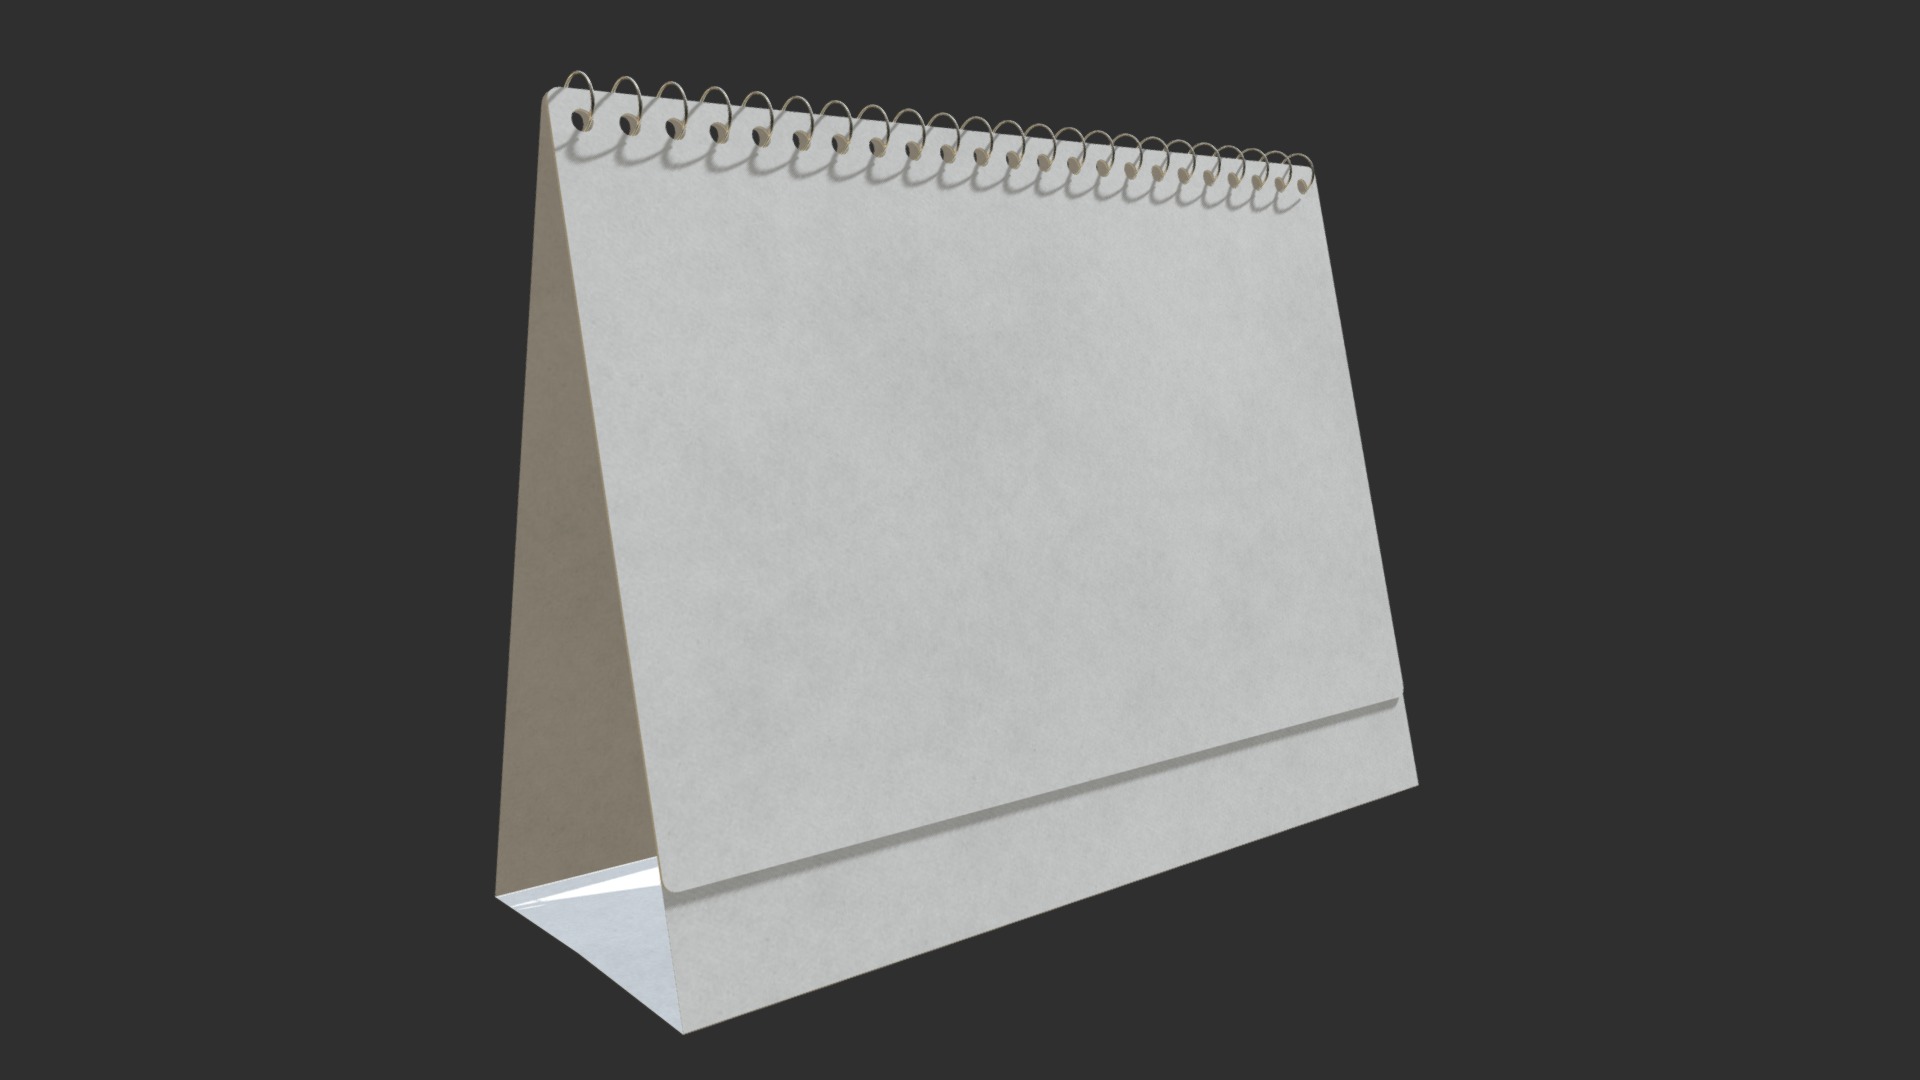 3D model Desktop calendar template - This is a 3D model of the Desktop calendar template. The 3D model is about a white box with a black background.